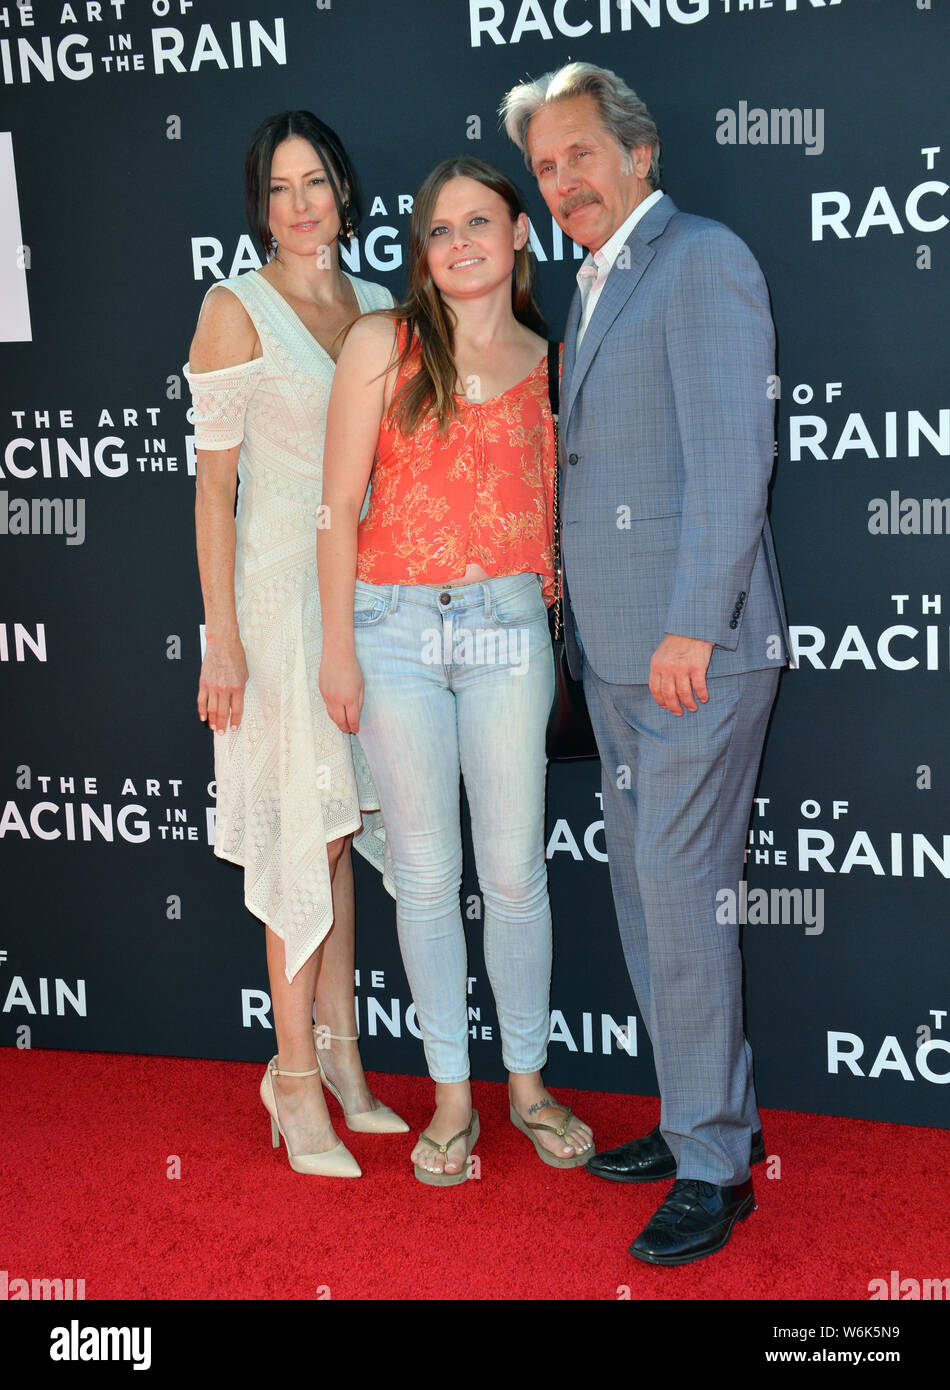 Los Angeles, USA. 01st Aug, 2019. LOS ANGELES, USA. August 02, 2019: Gary Cole, Guest & Mary Cole at the premiere of 'The Art of Racing in the Rain' at the El Capitan Theatre. Picture Credit: Paul Smith/Alamy Live News Stock Photo